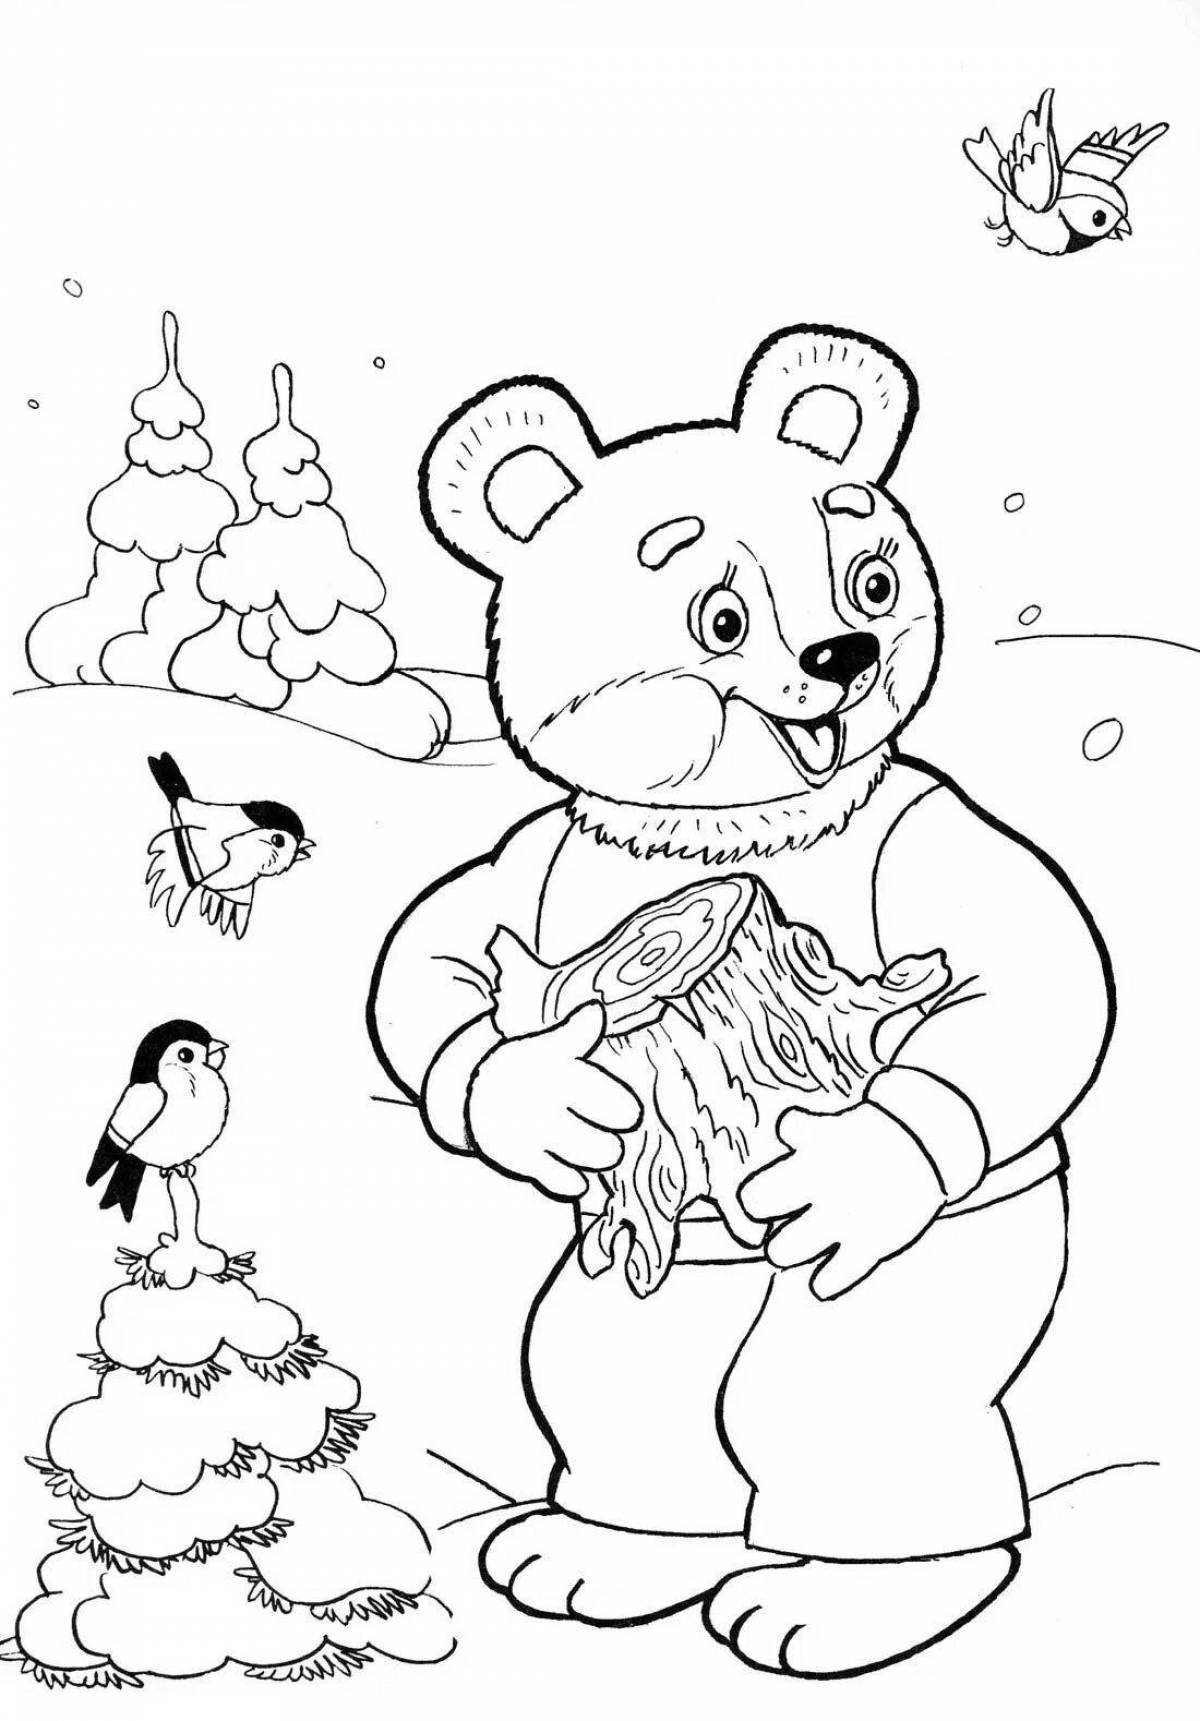 Coloring page adorable bear in the forest